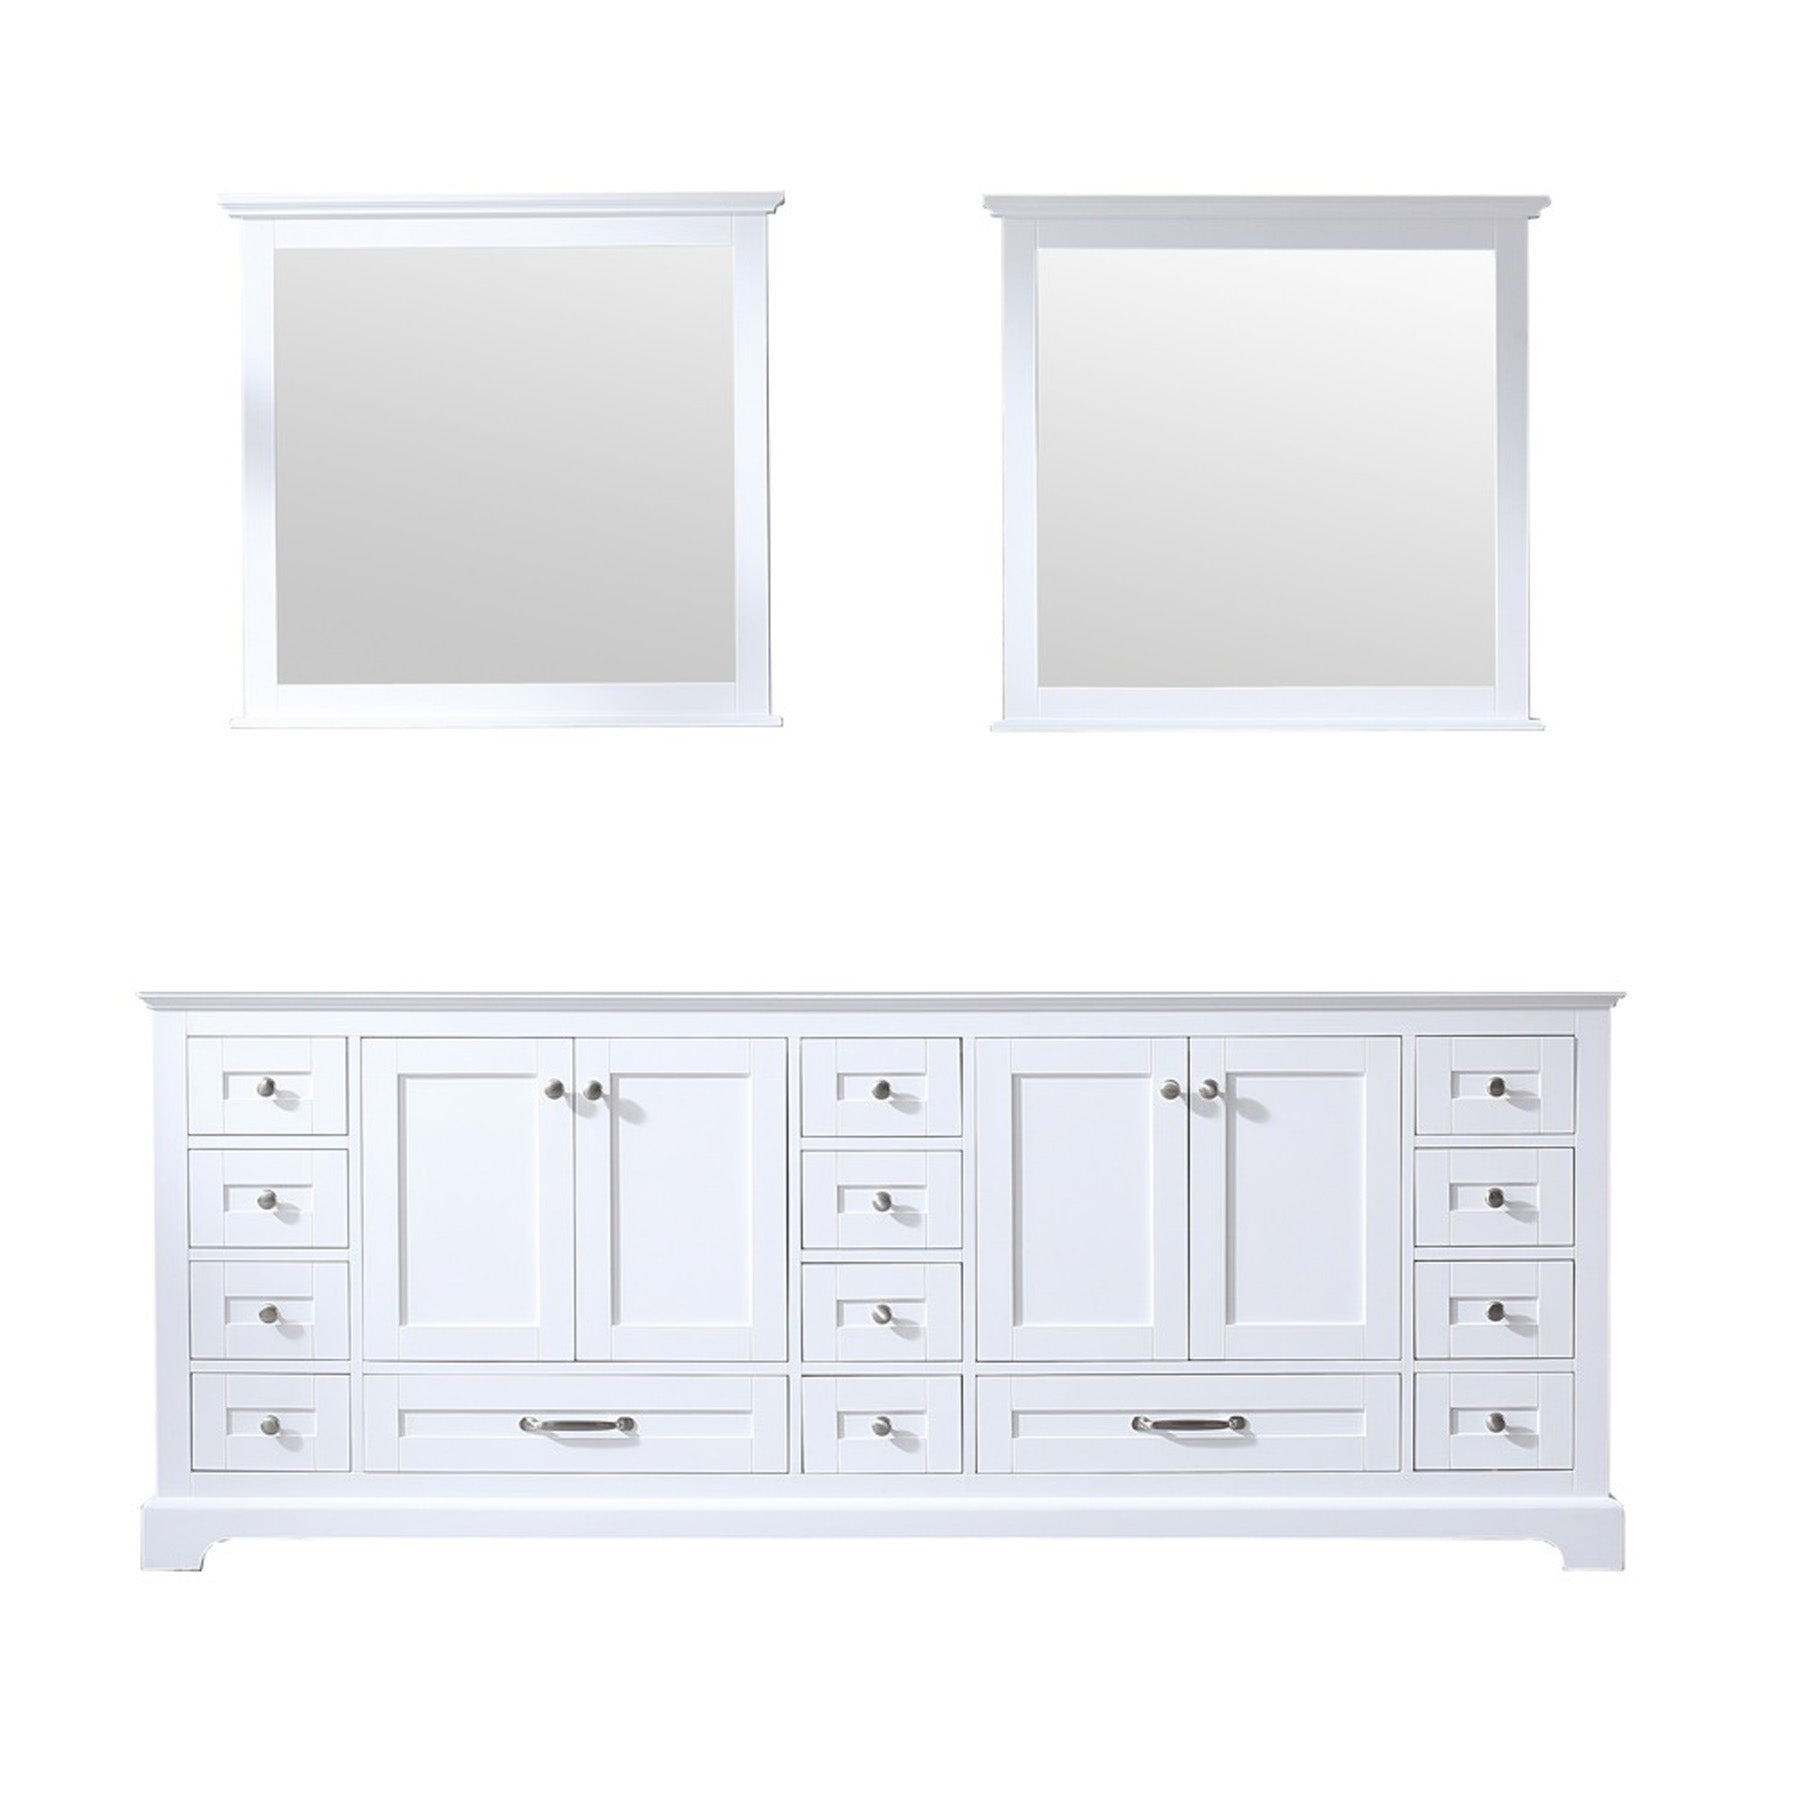 Dukes 84 In. White Freestanding Double Bathroom Vanity Cabinet Without Top & 34 In. Mirrors